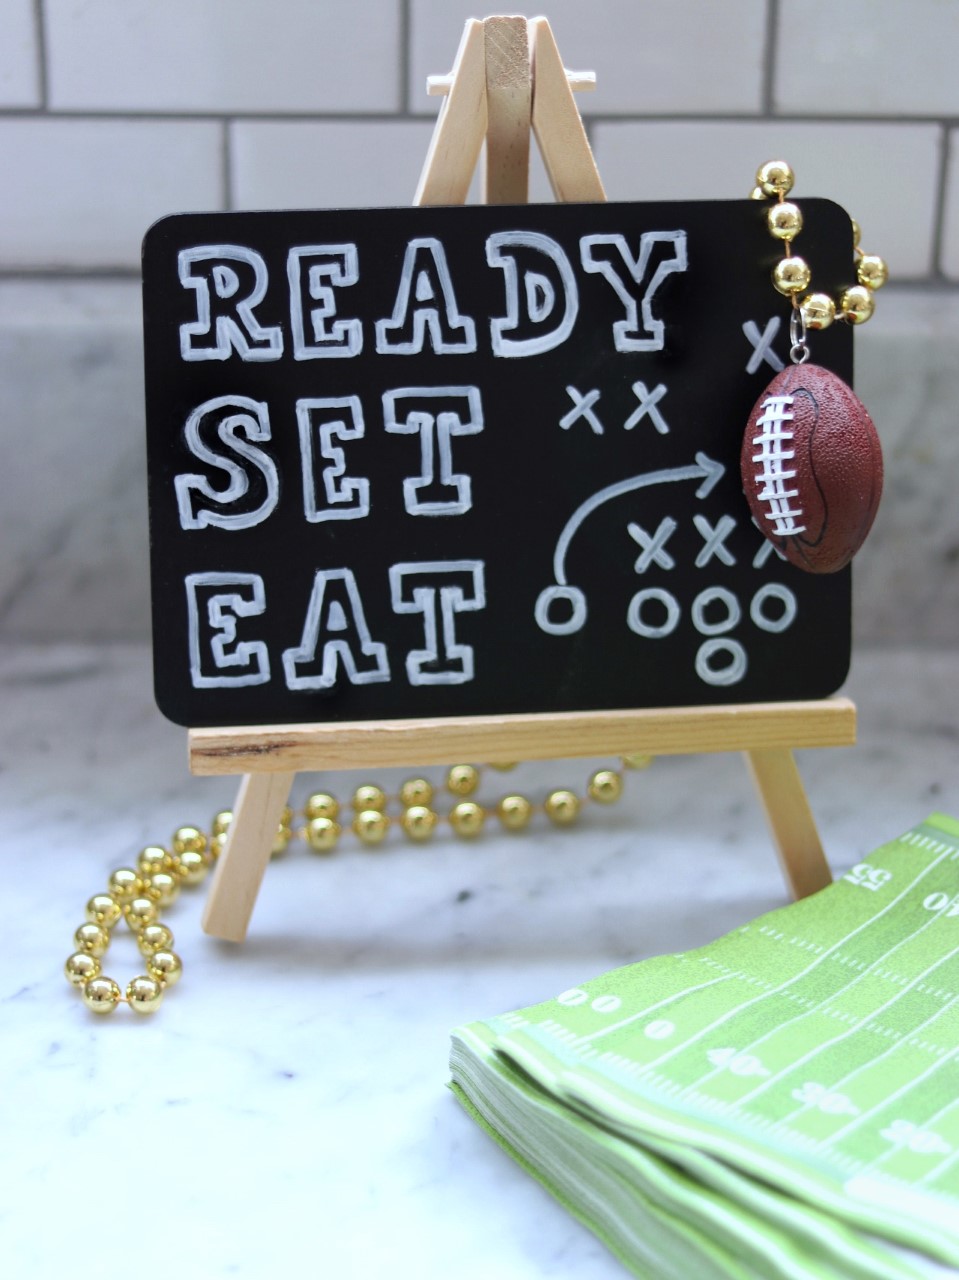 football party decorations: ready set eat food sign